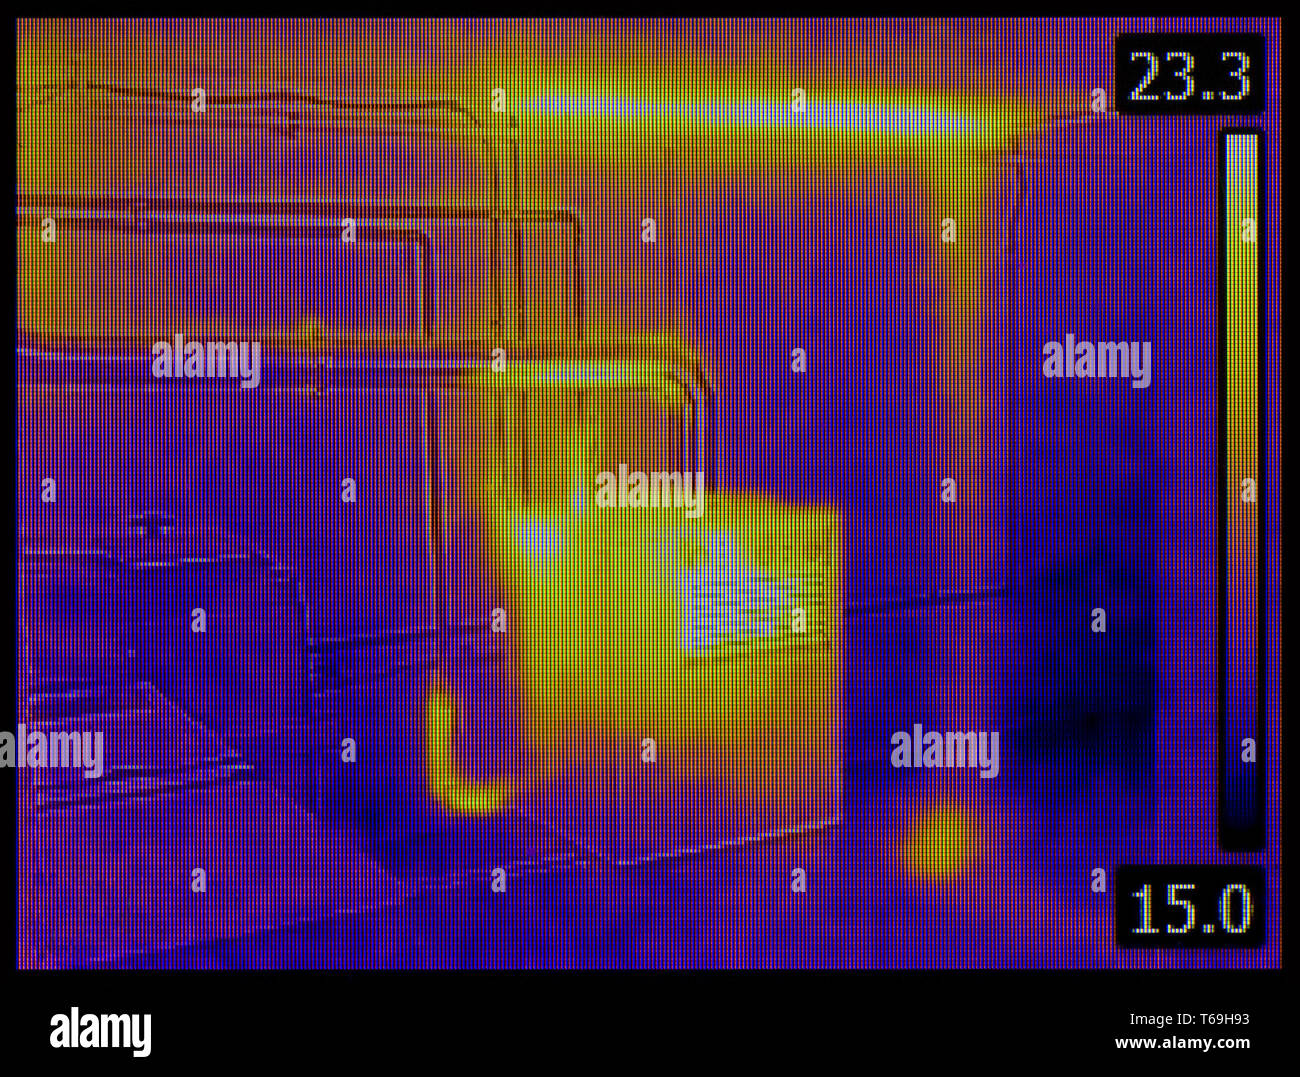 Heat Dissipation Thermal Image Stock Photo